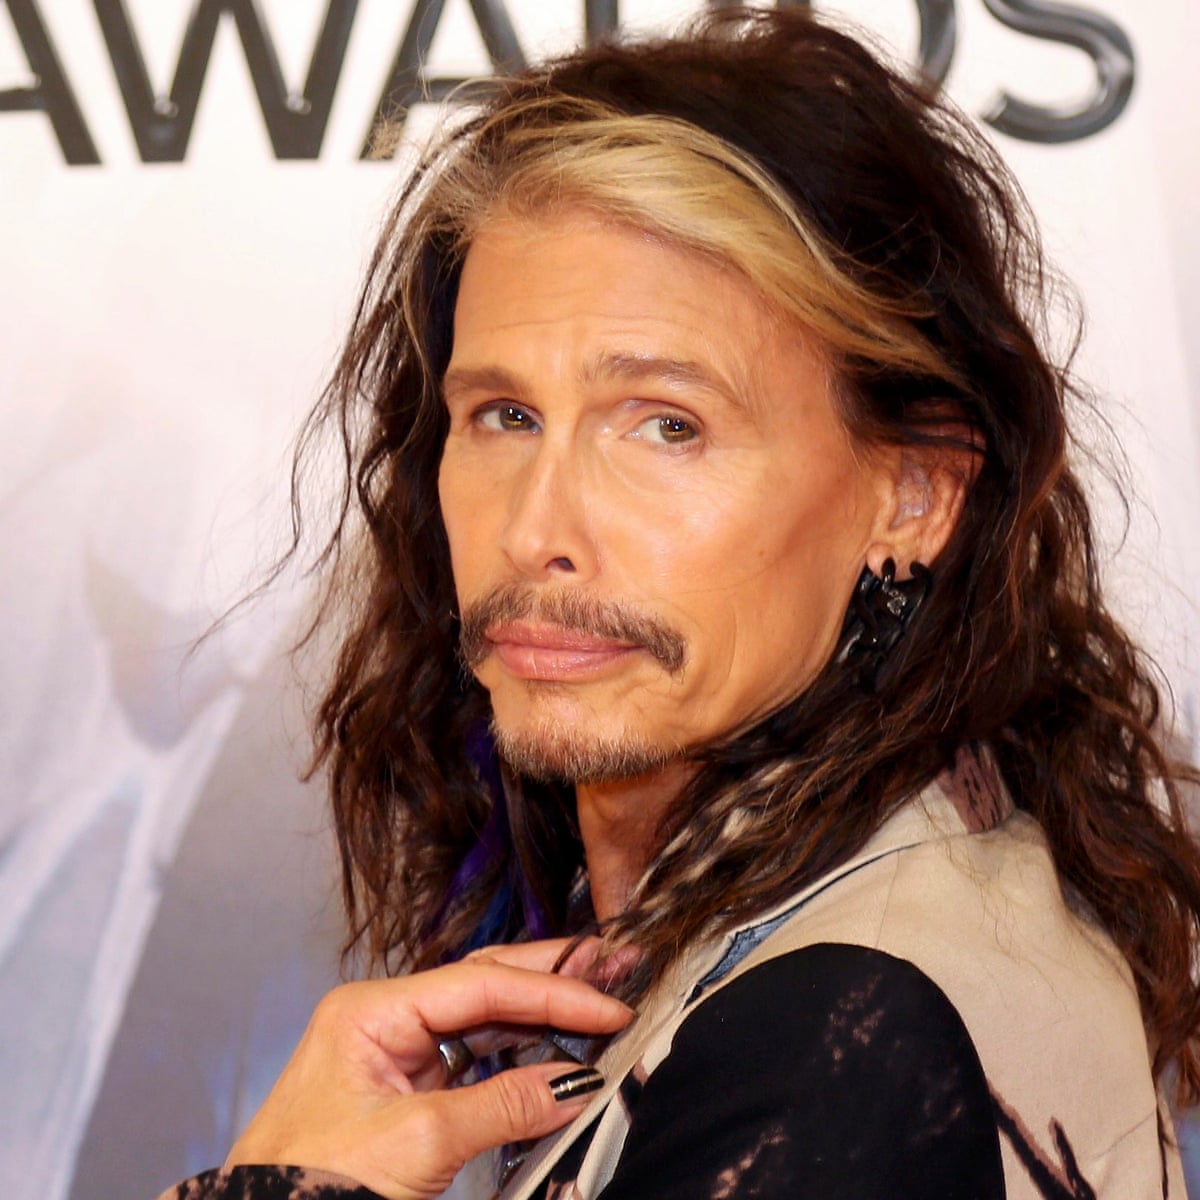 Aerosmith frontman Steven Tyler launches fund to help abused girls |  Aerosmith | The Guardian